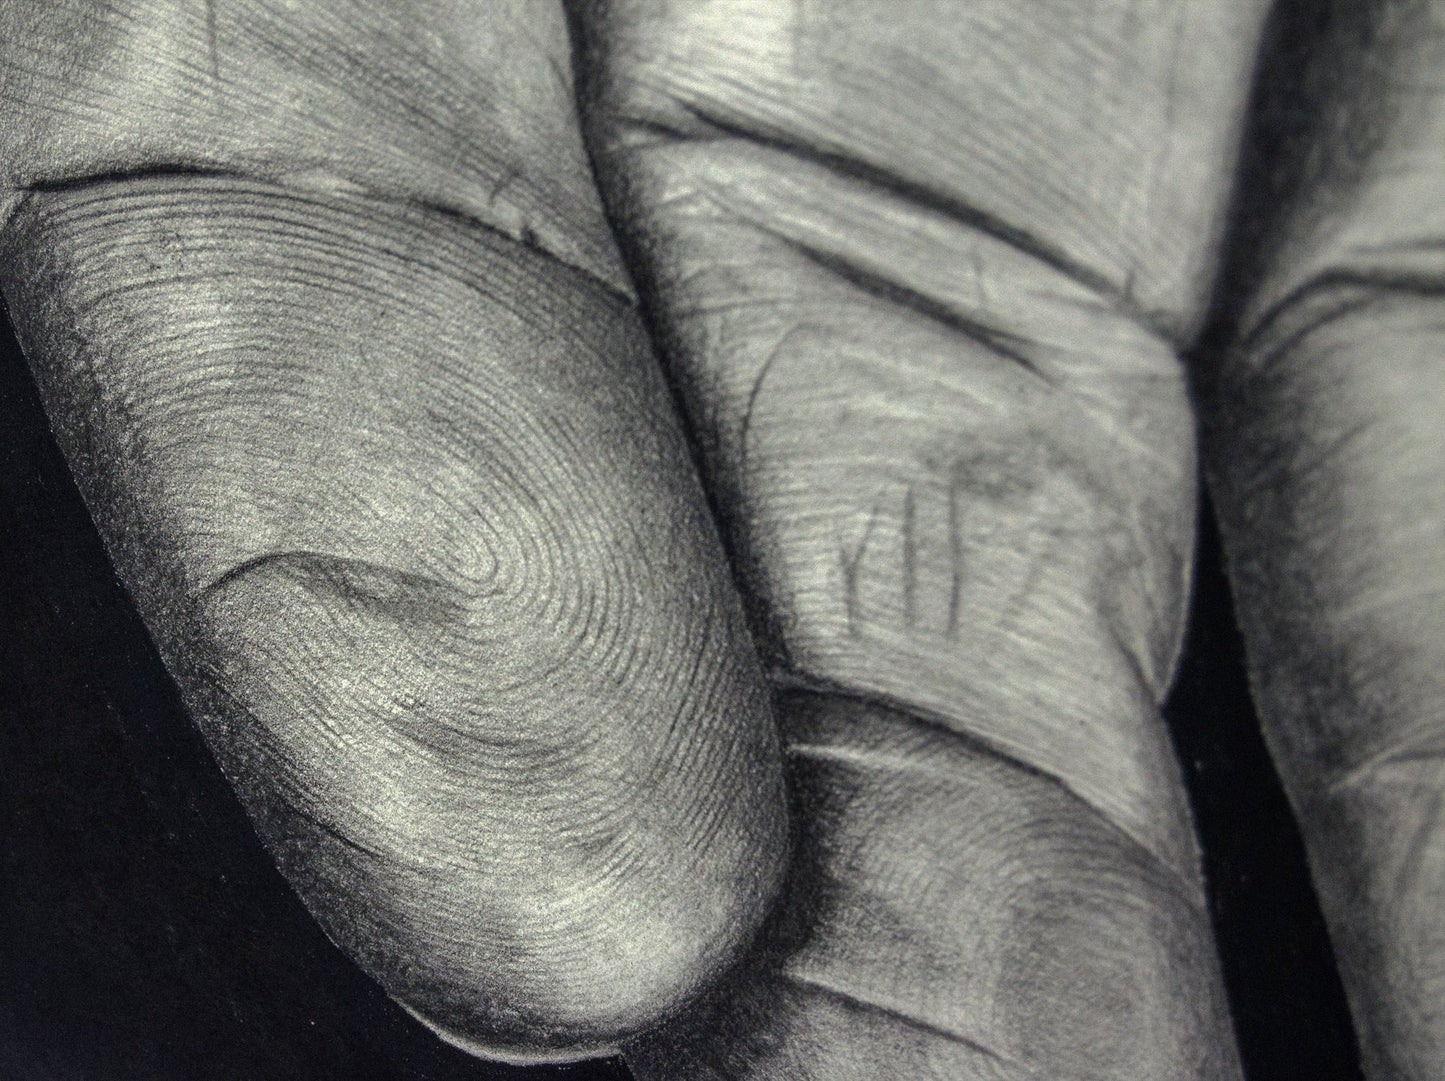 Untitled (Hands) (PRINT EDITION)